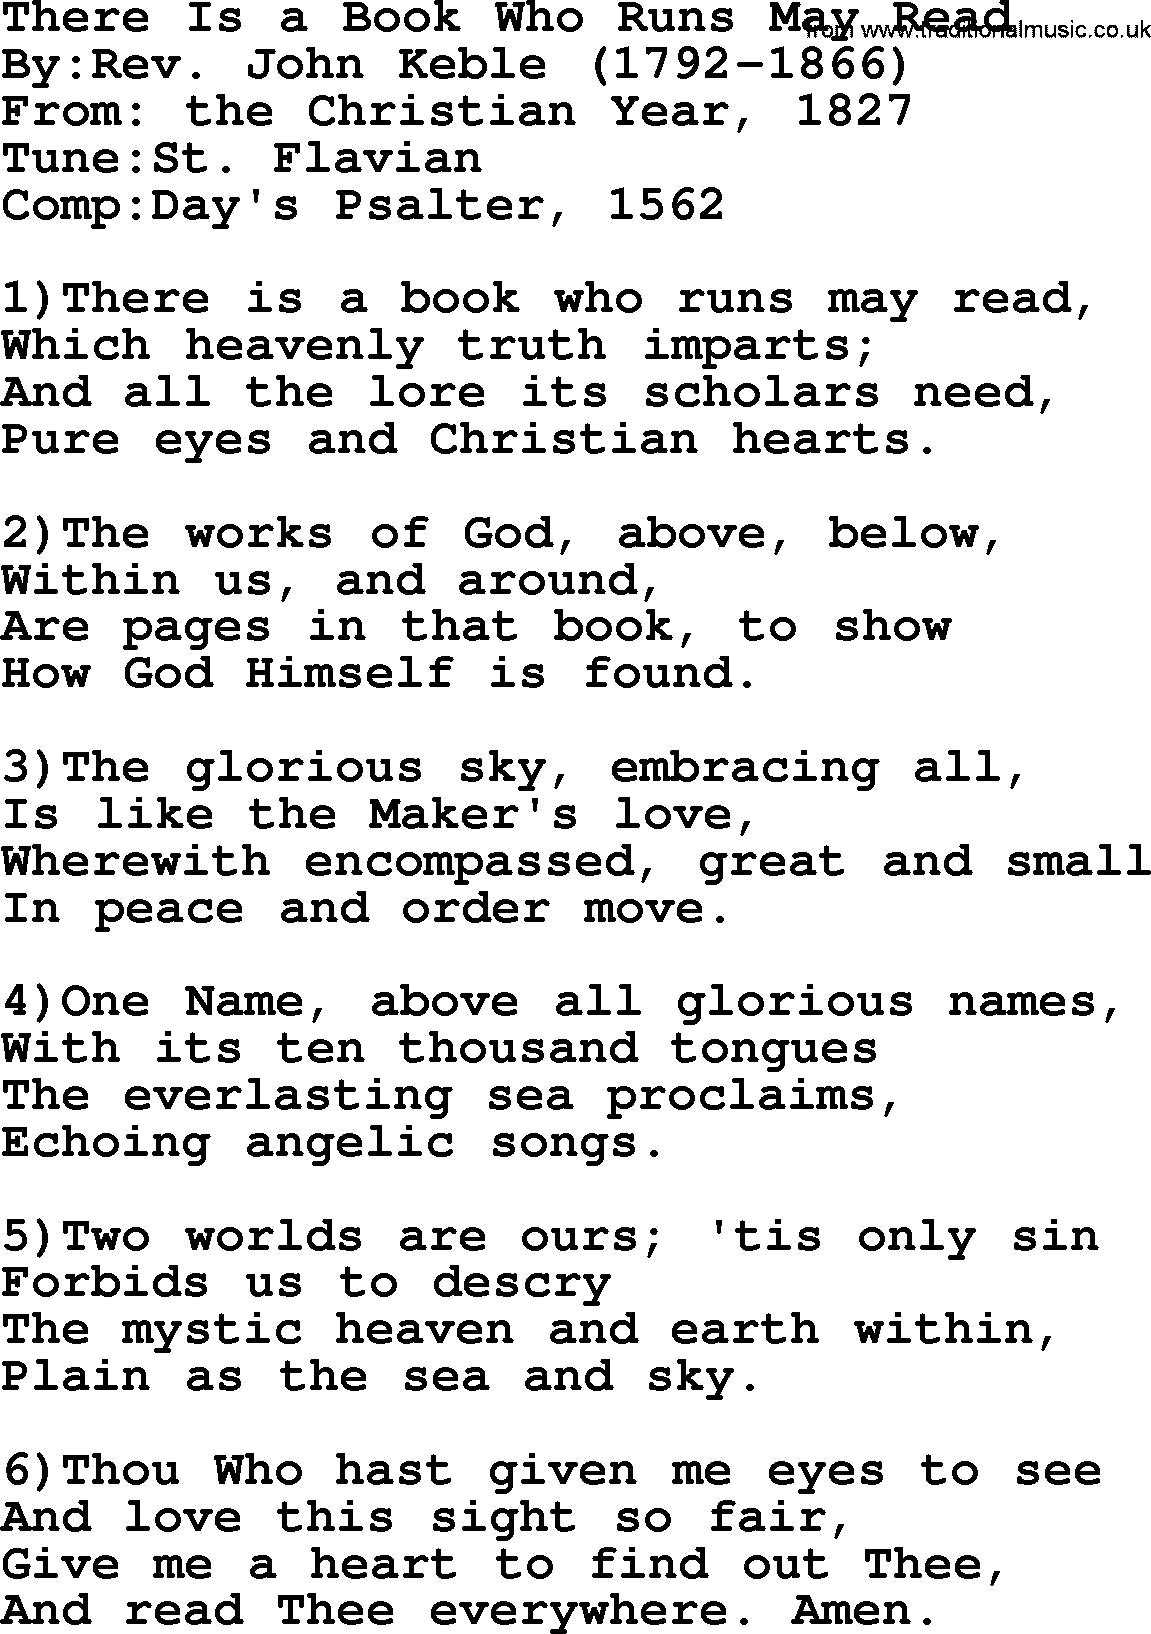 Methodist Hymn: There Is A Book Who Runs May Read, lyrics